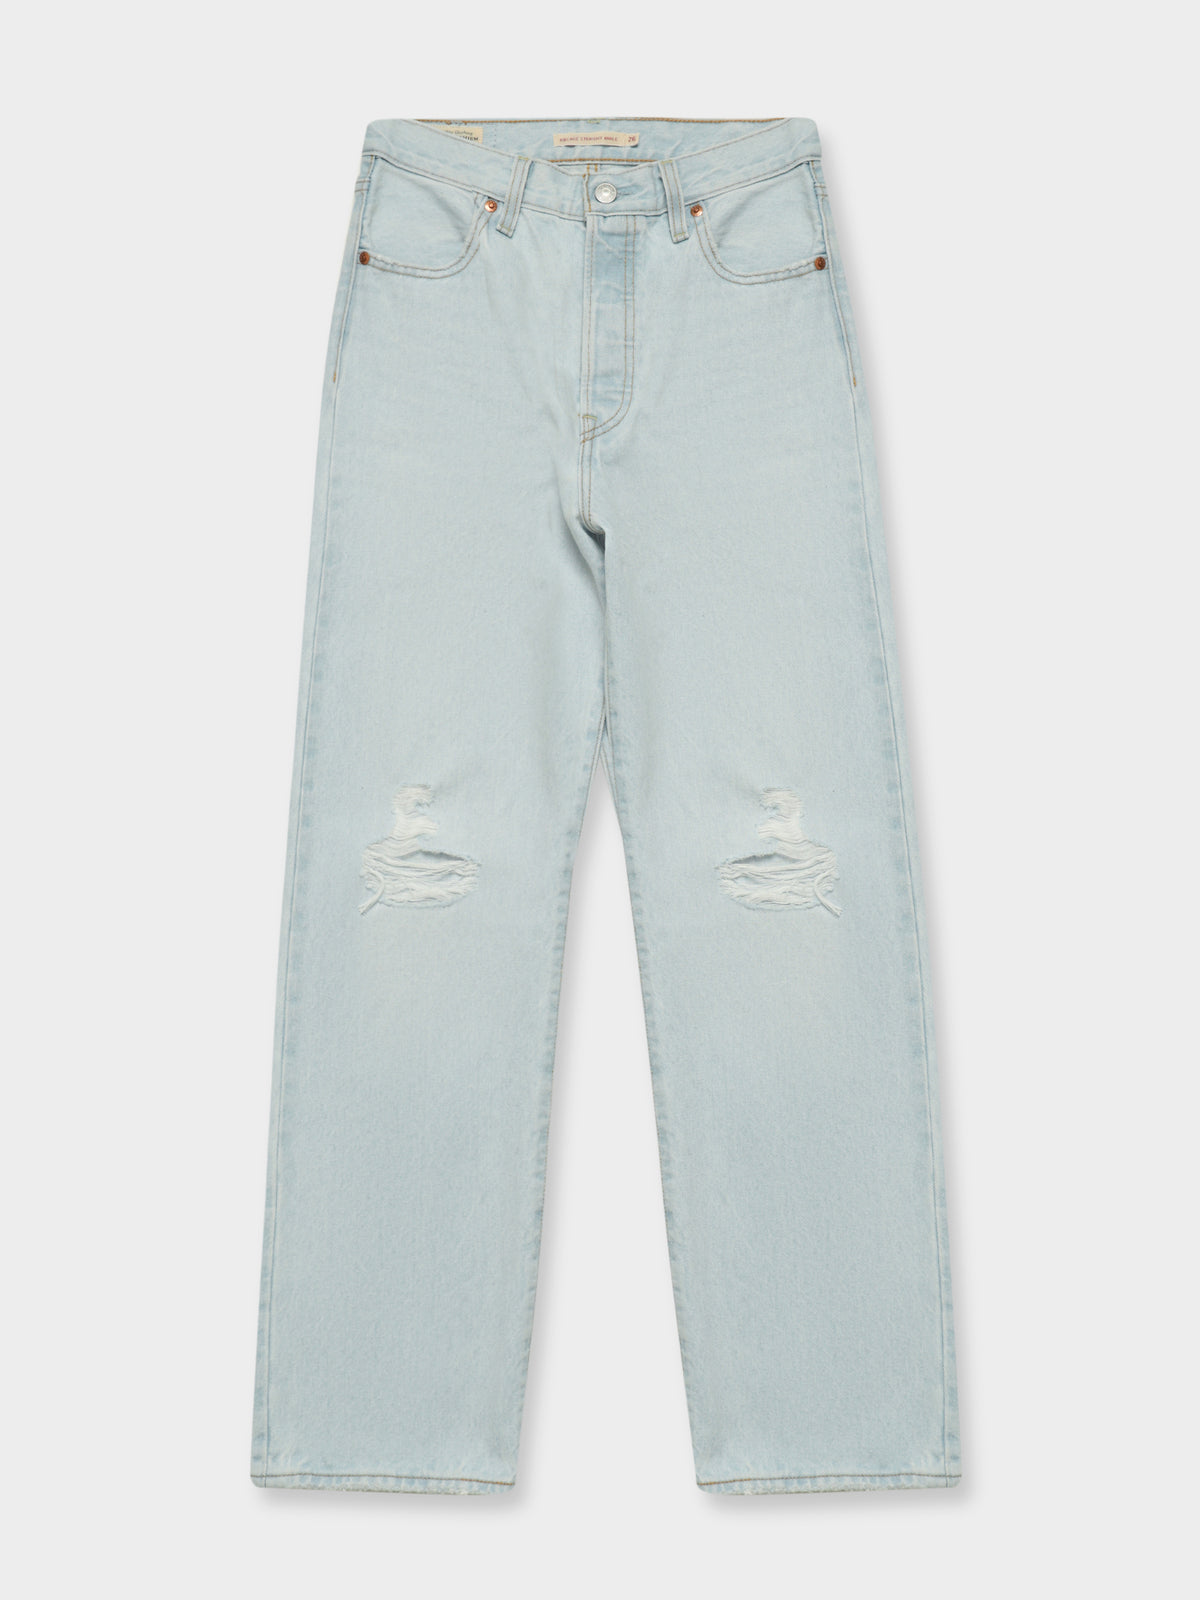 Ribcage Straight Ankle Jeans in Ojai Shore Blue